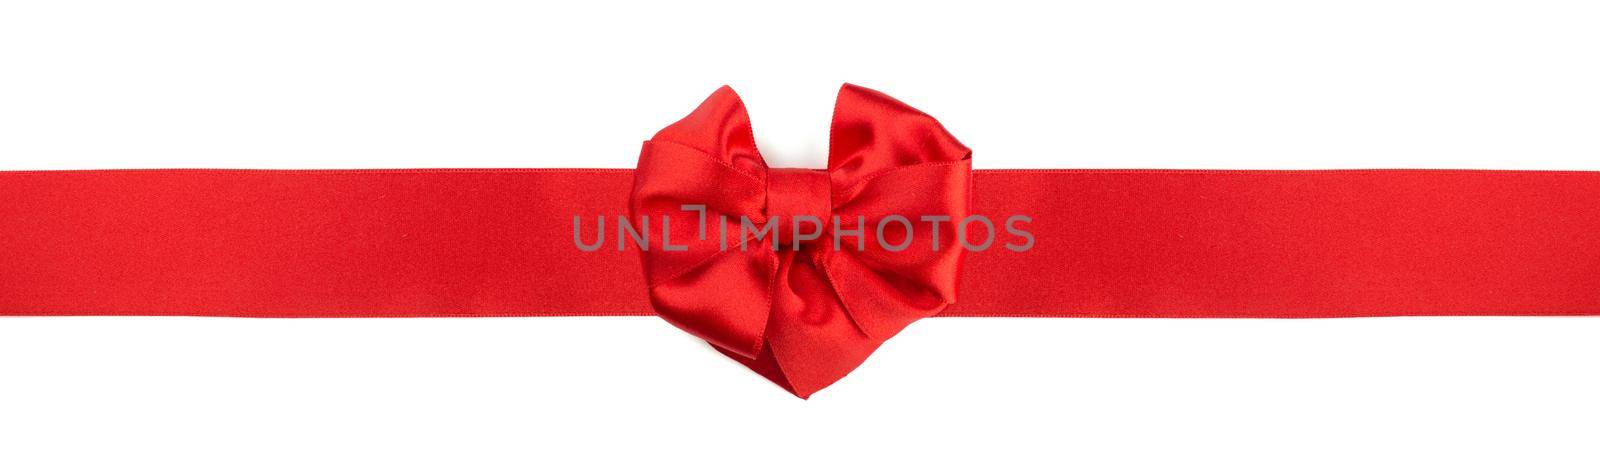 Red heart shape silk satin ribbon bow isolated in white background, love Valentine day concept